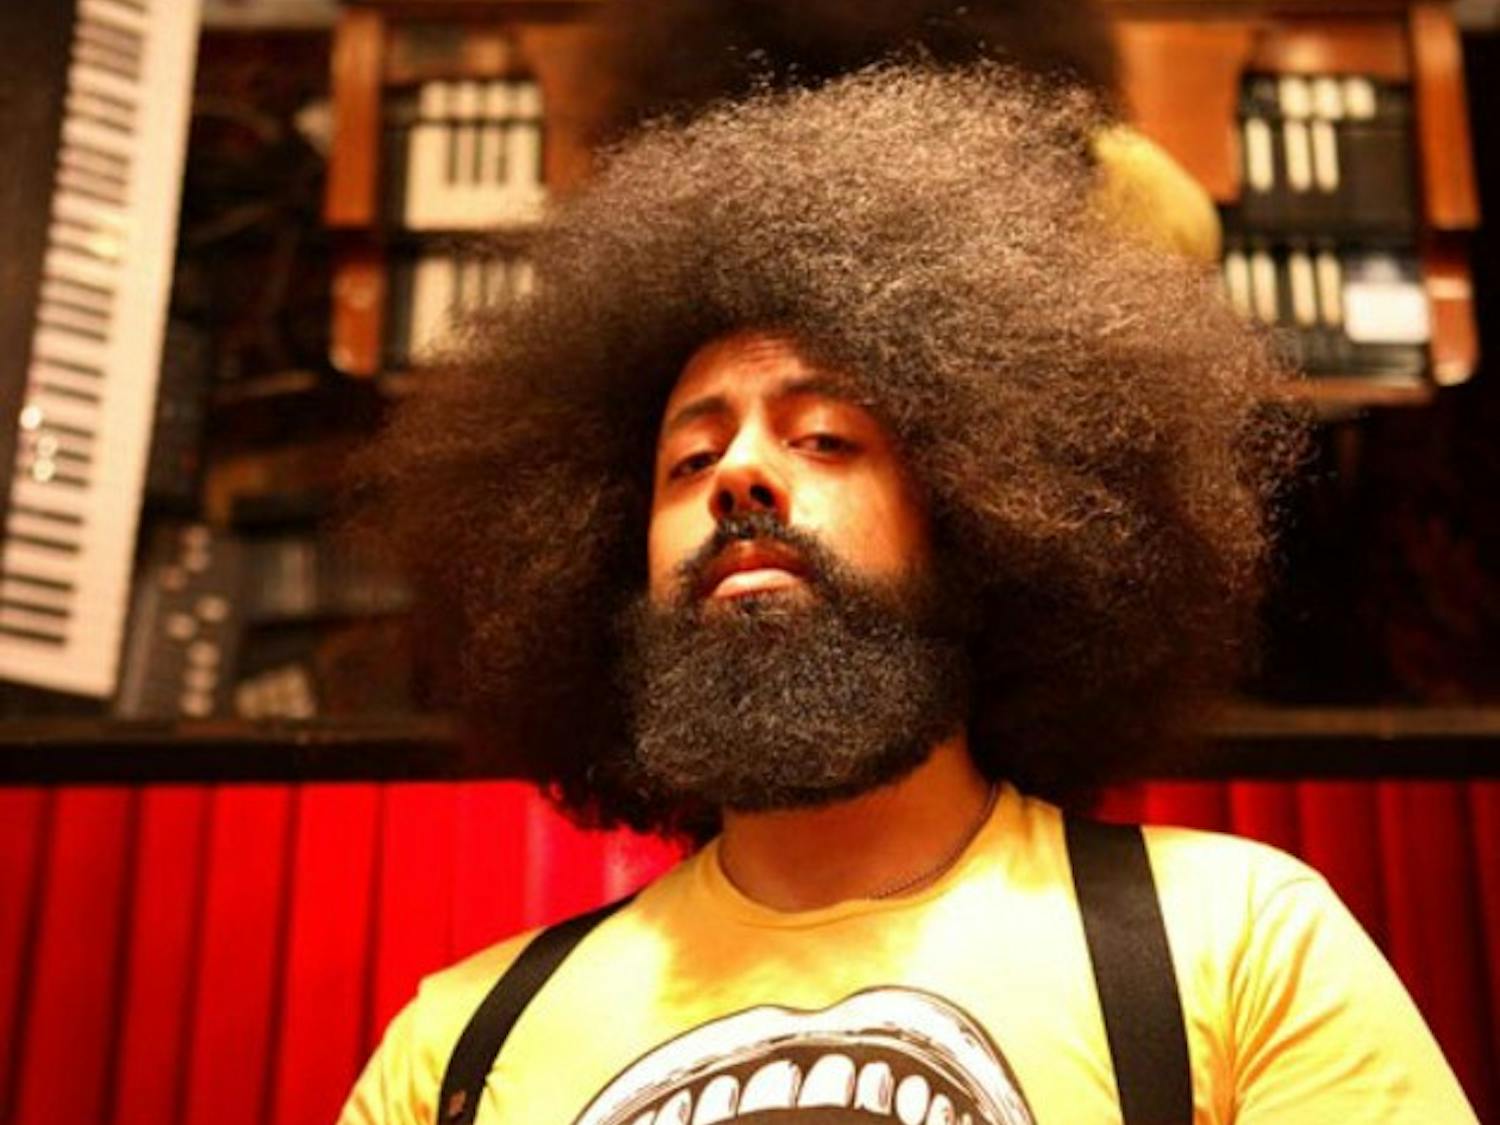 Popular comedian Reggie Watts, who will perform this Saturday night, has given a TED talk and created a parody of Radiohead.